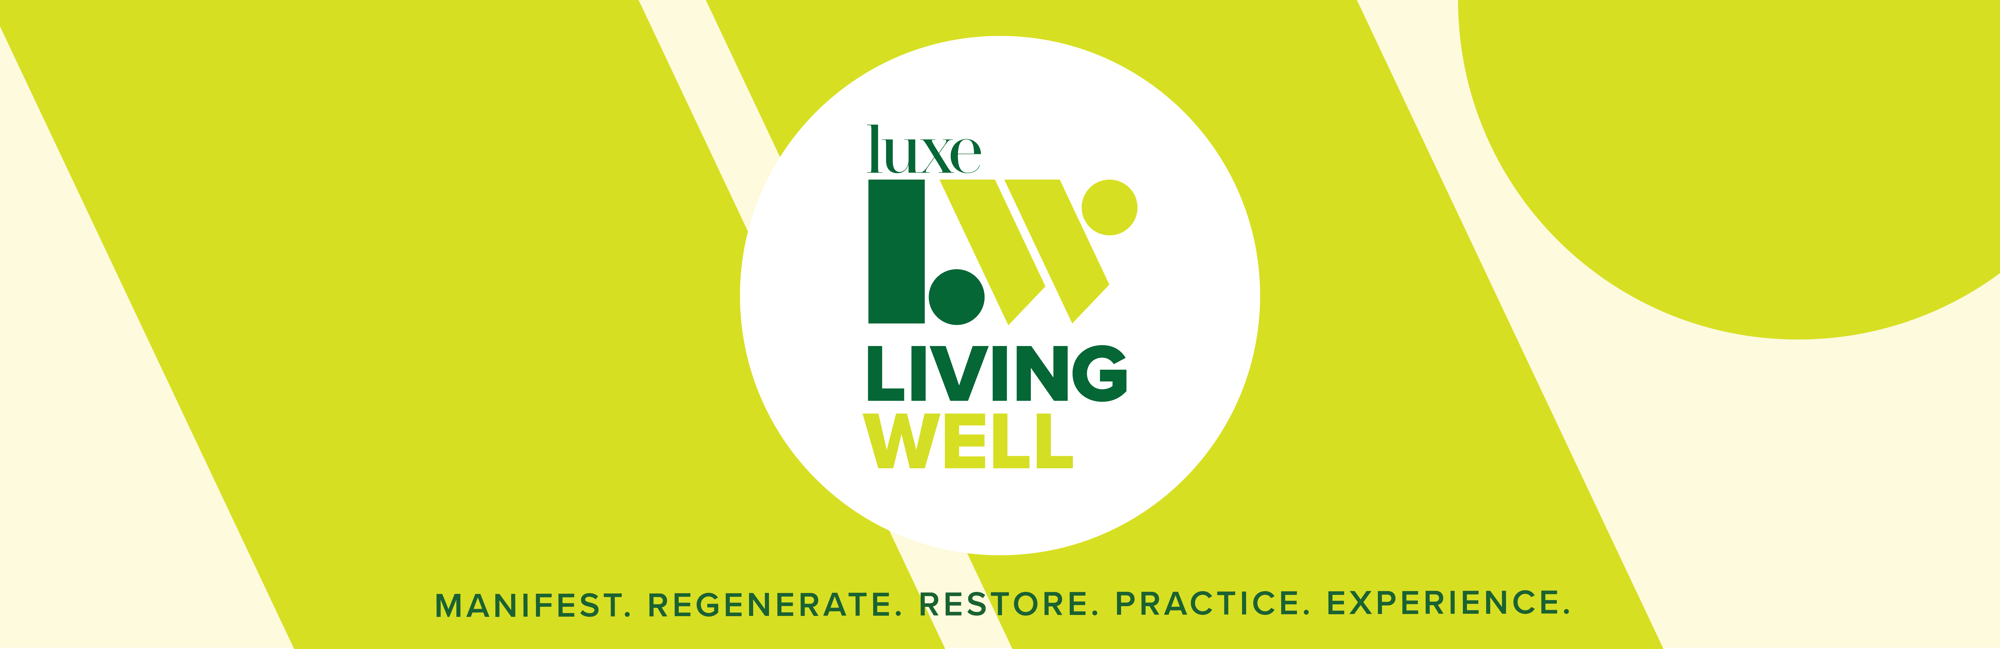 Luxe Living Well Summit 